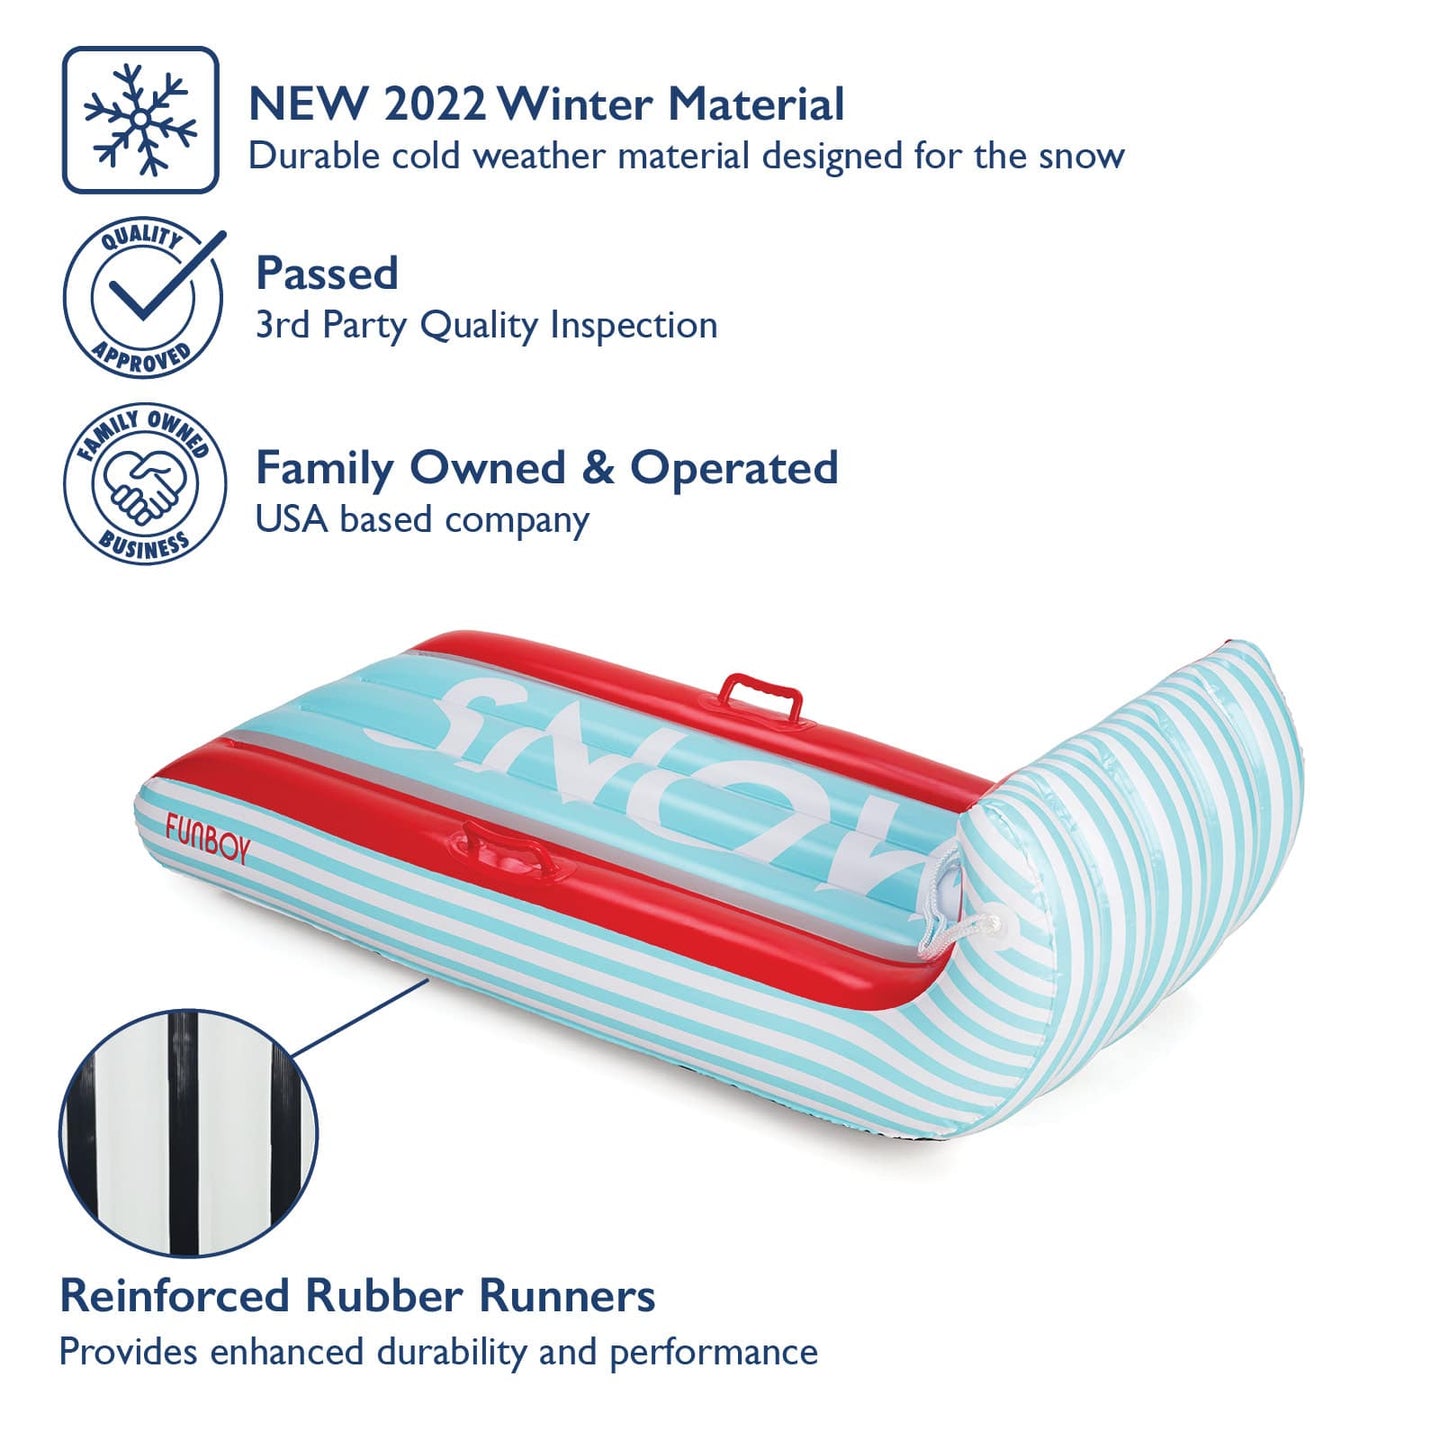 FUNBOY Winter Sled. New 2022 Winter Material. Durable cold weather material designed for snow. Passed 3rd Party Quality Inspection. Family Owned and Operated. USA Based. Reinforced Rubber Runners.  Provides enhanced durability and performance